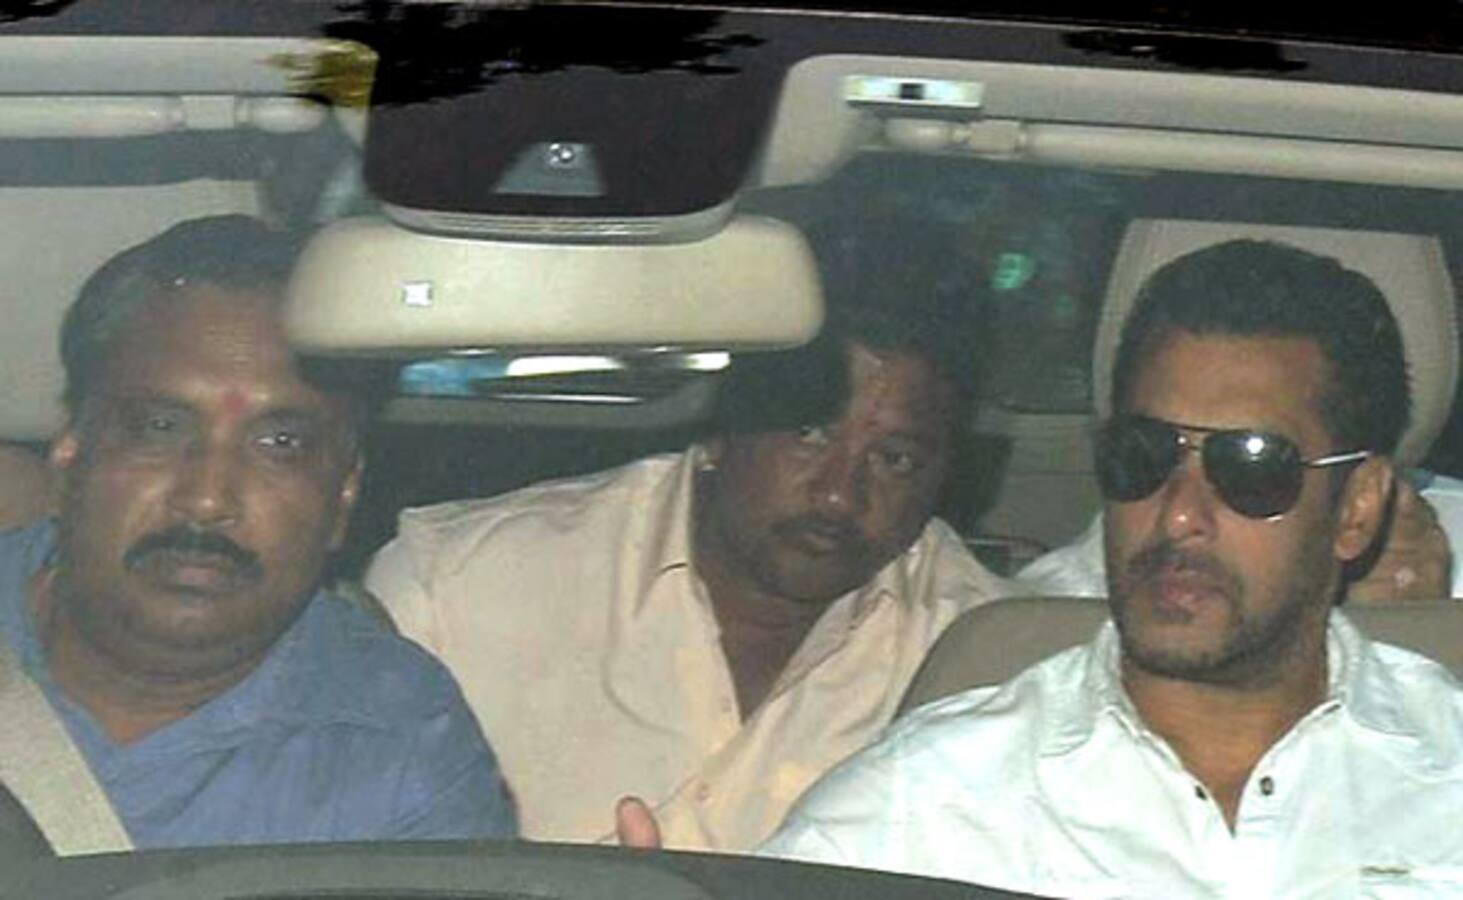 Salman Khan's driver Ashok Singh arrested for misleading the court in 2002 hit-and-run case